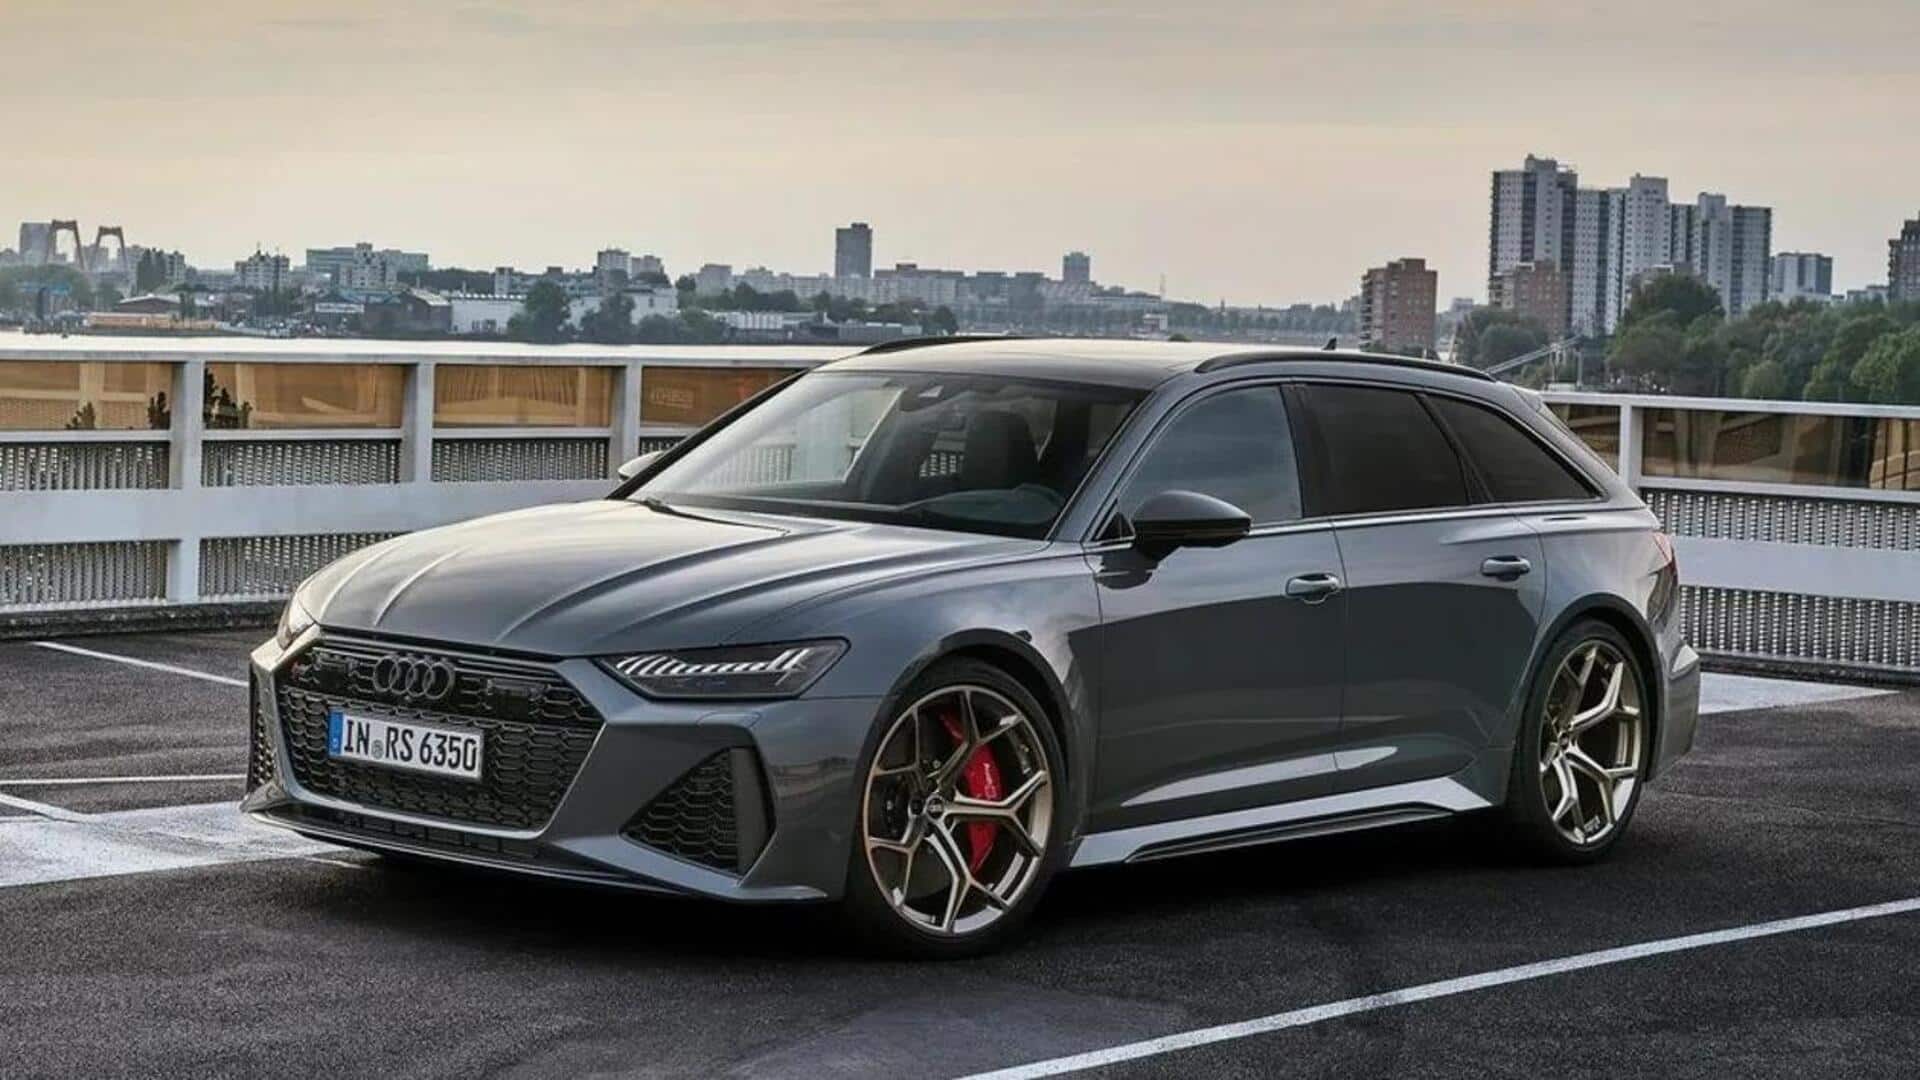 Audi to revive the RS6 moniker as a high-performance EV